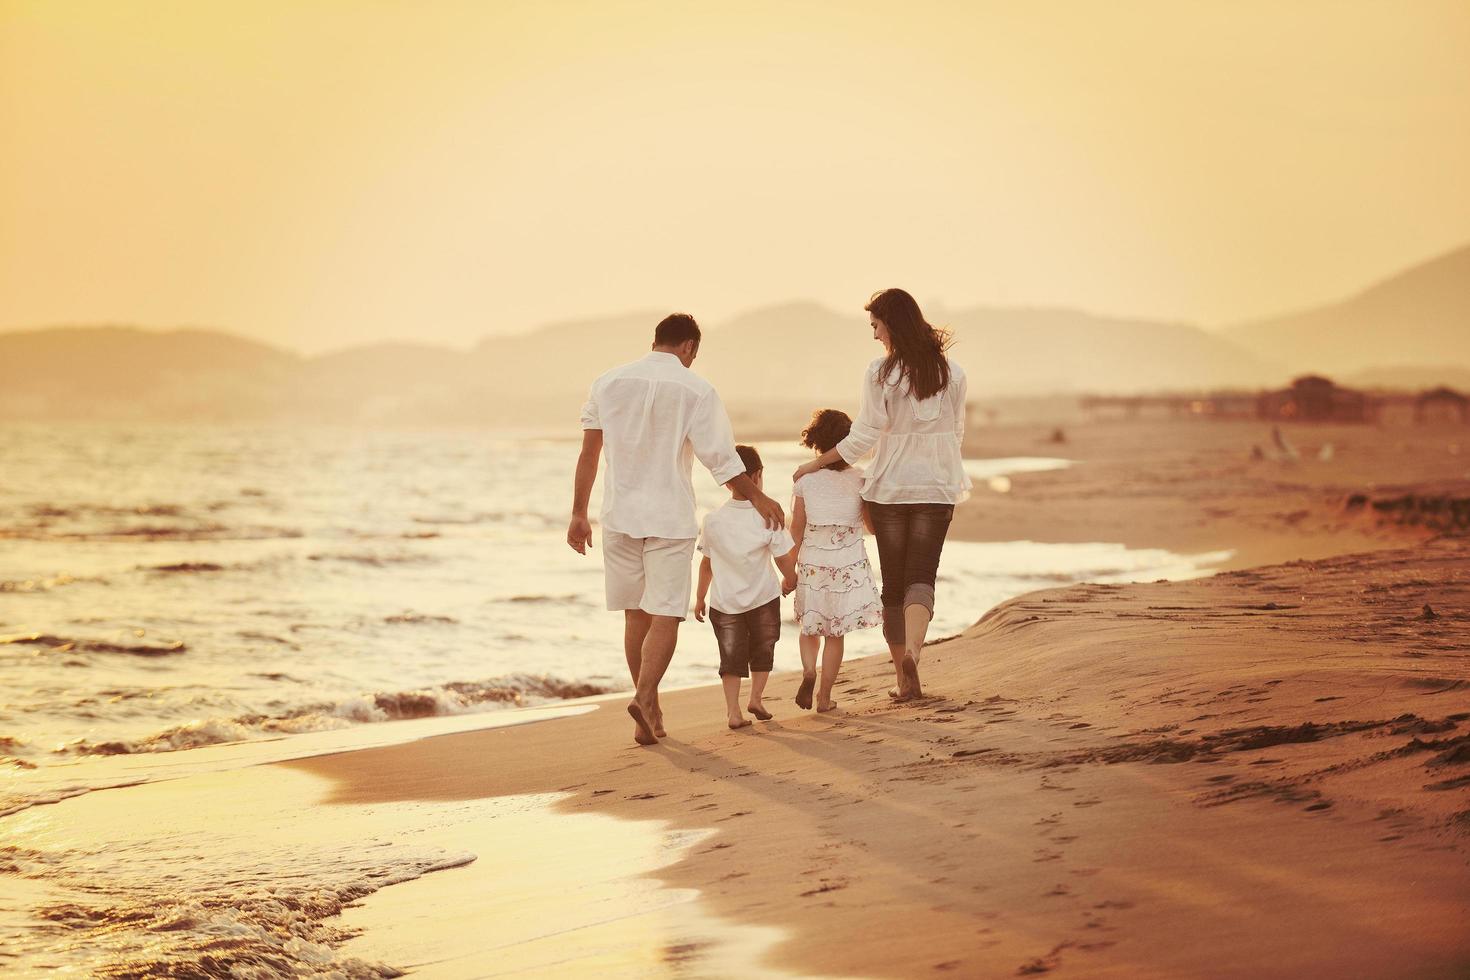 happy young family have fun on beach at sunset photo